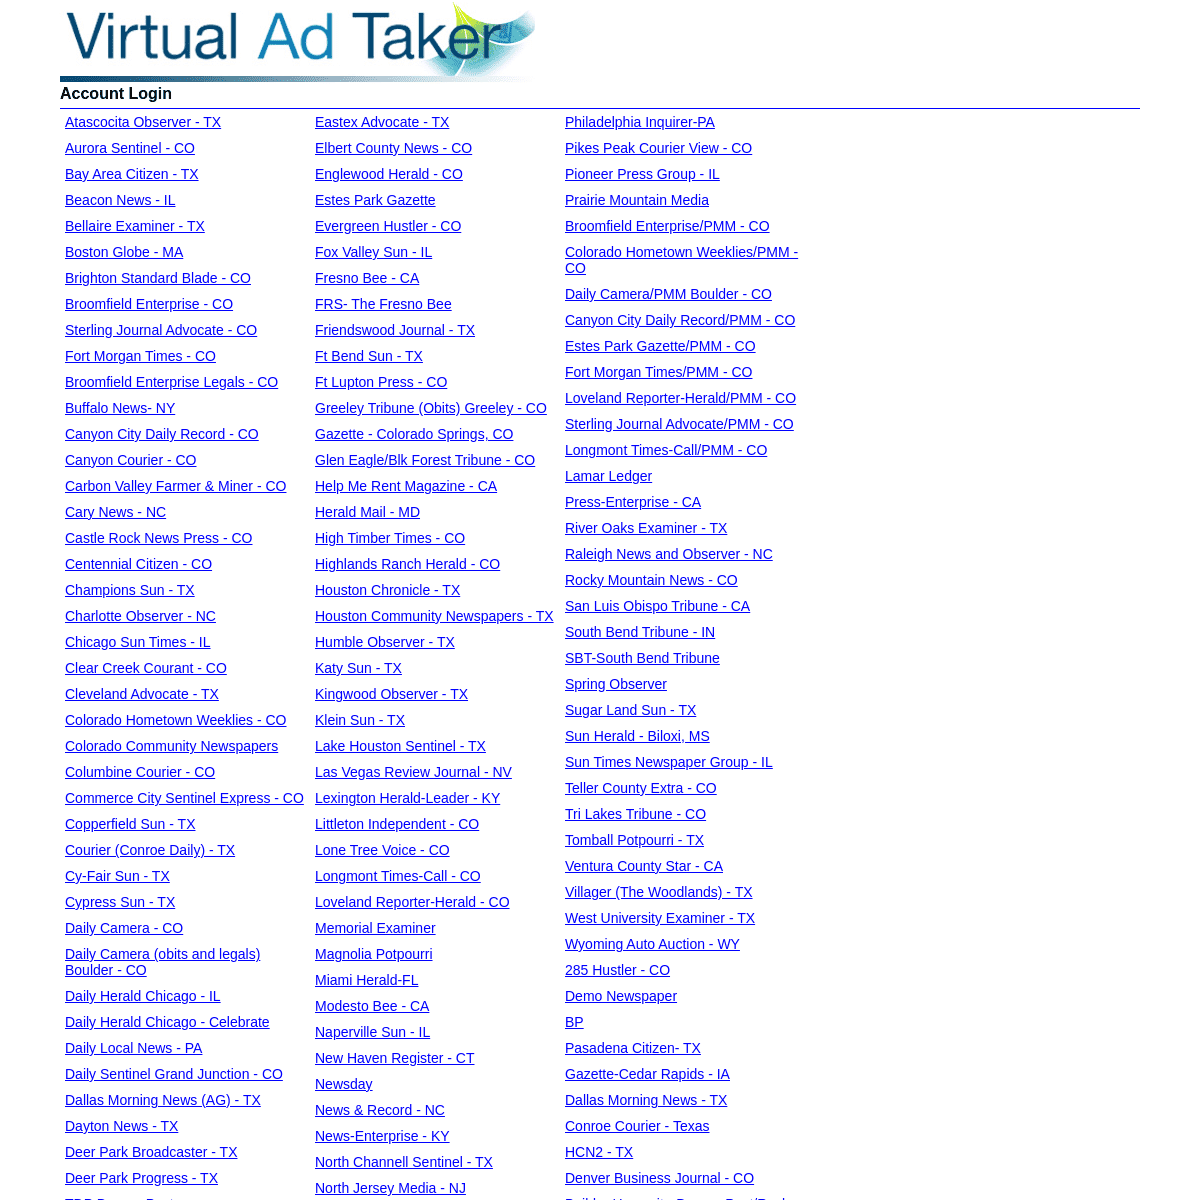 A complete backup of https://virtualadtaker.net